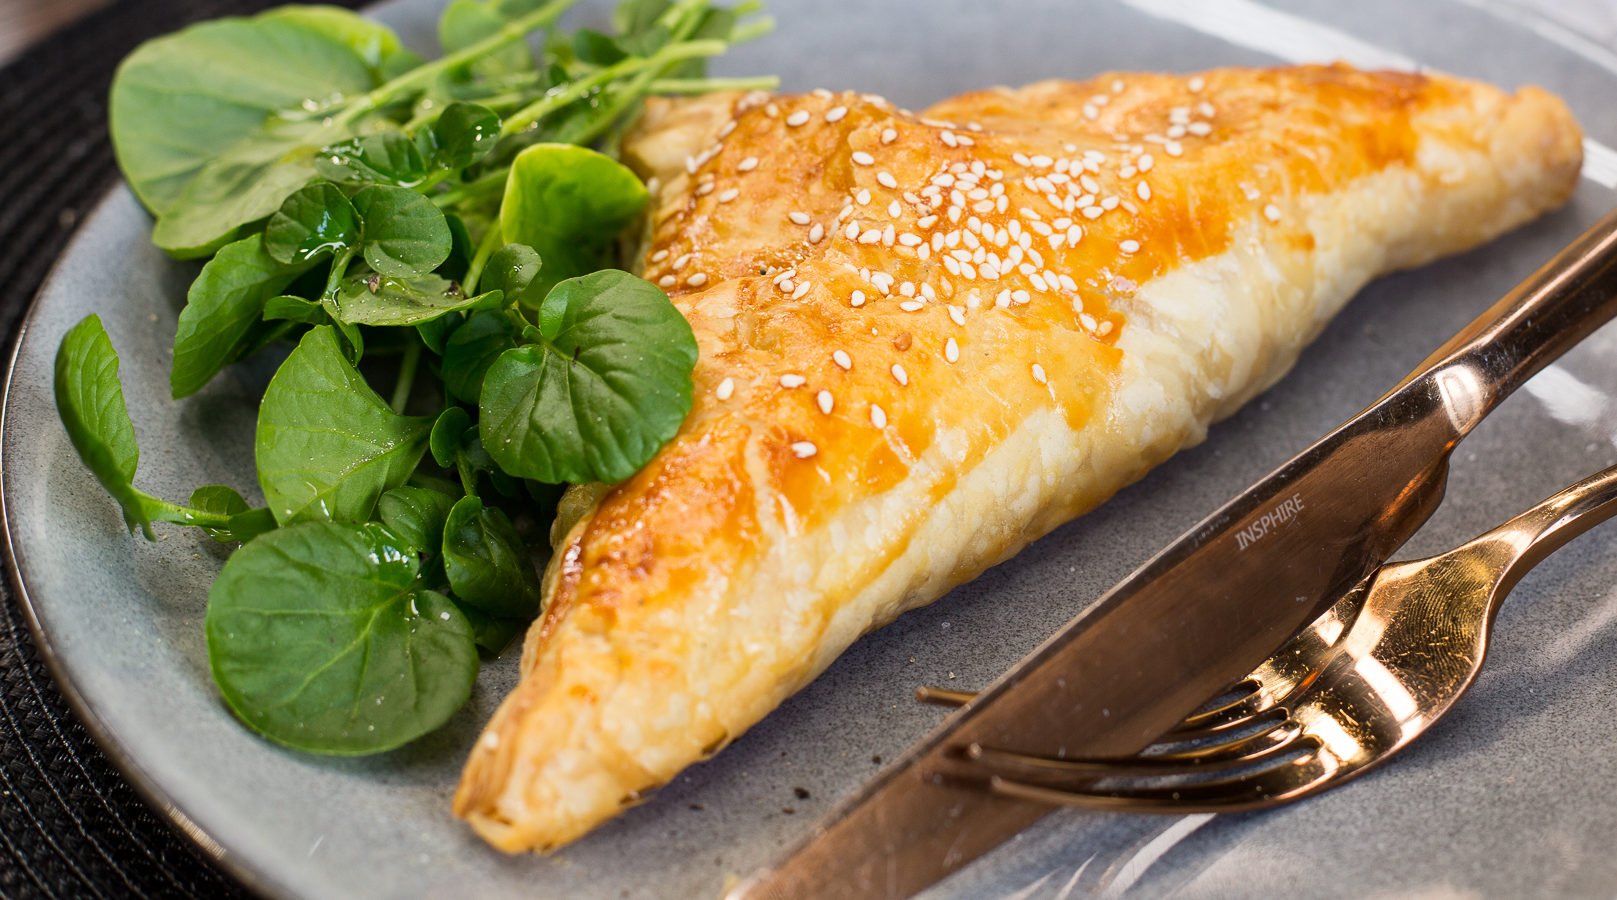 A triangle shaped baked pie on a plate with greens.